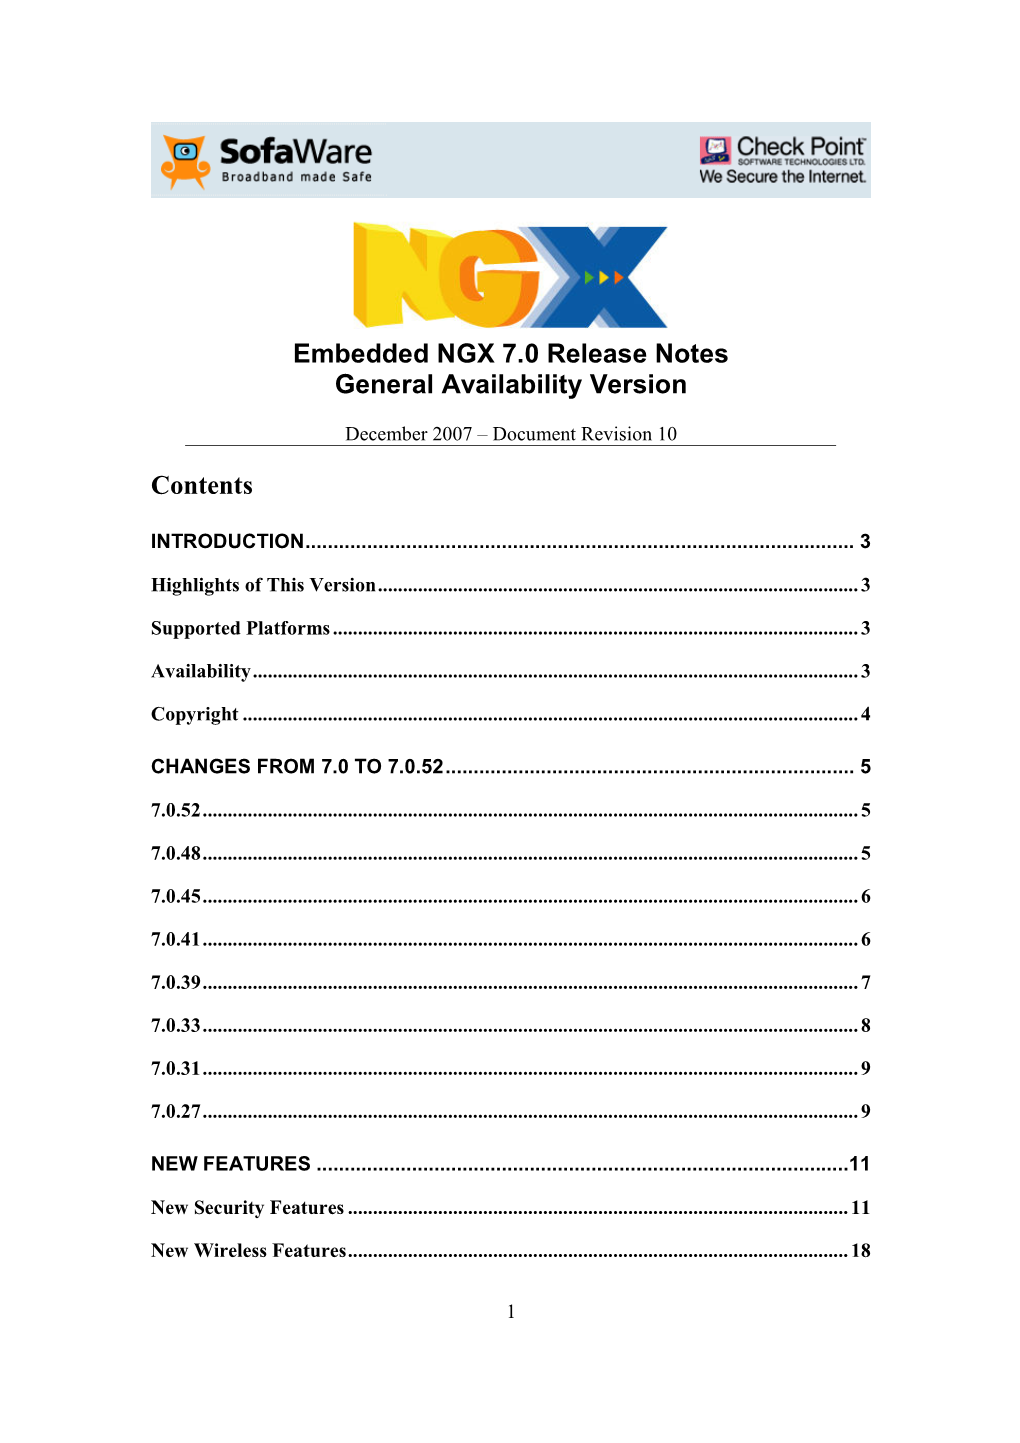 Embedded NGX 7.0 Release Notes General Availability Version Contents